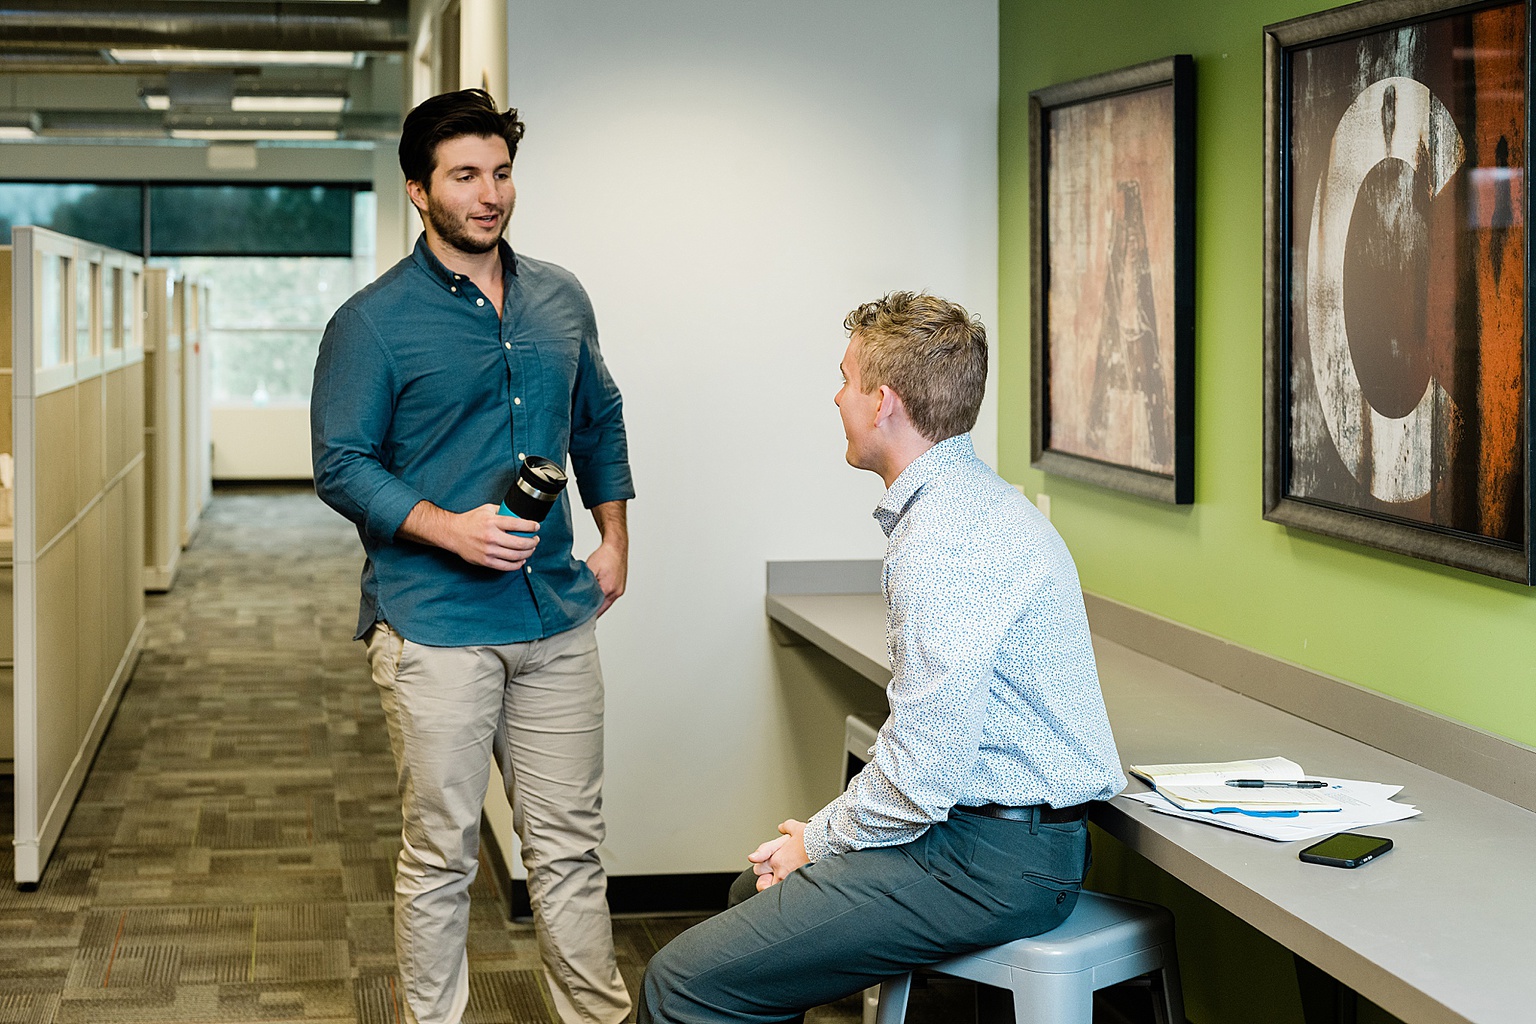 Lansing commercial photography - photo of two men talking in an office, by Allie Siarto & Co., Lansing branding and commercial photographer 